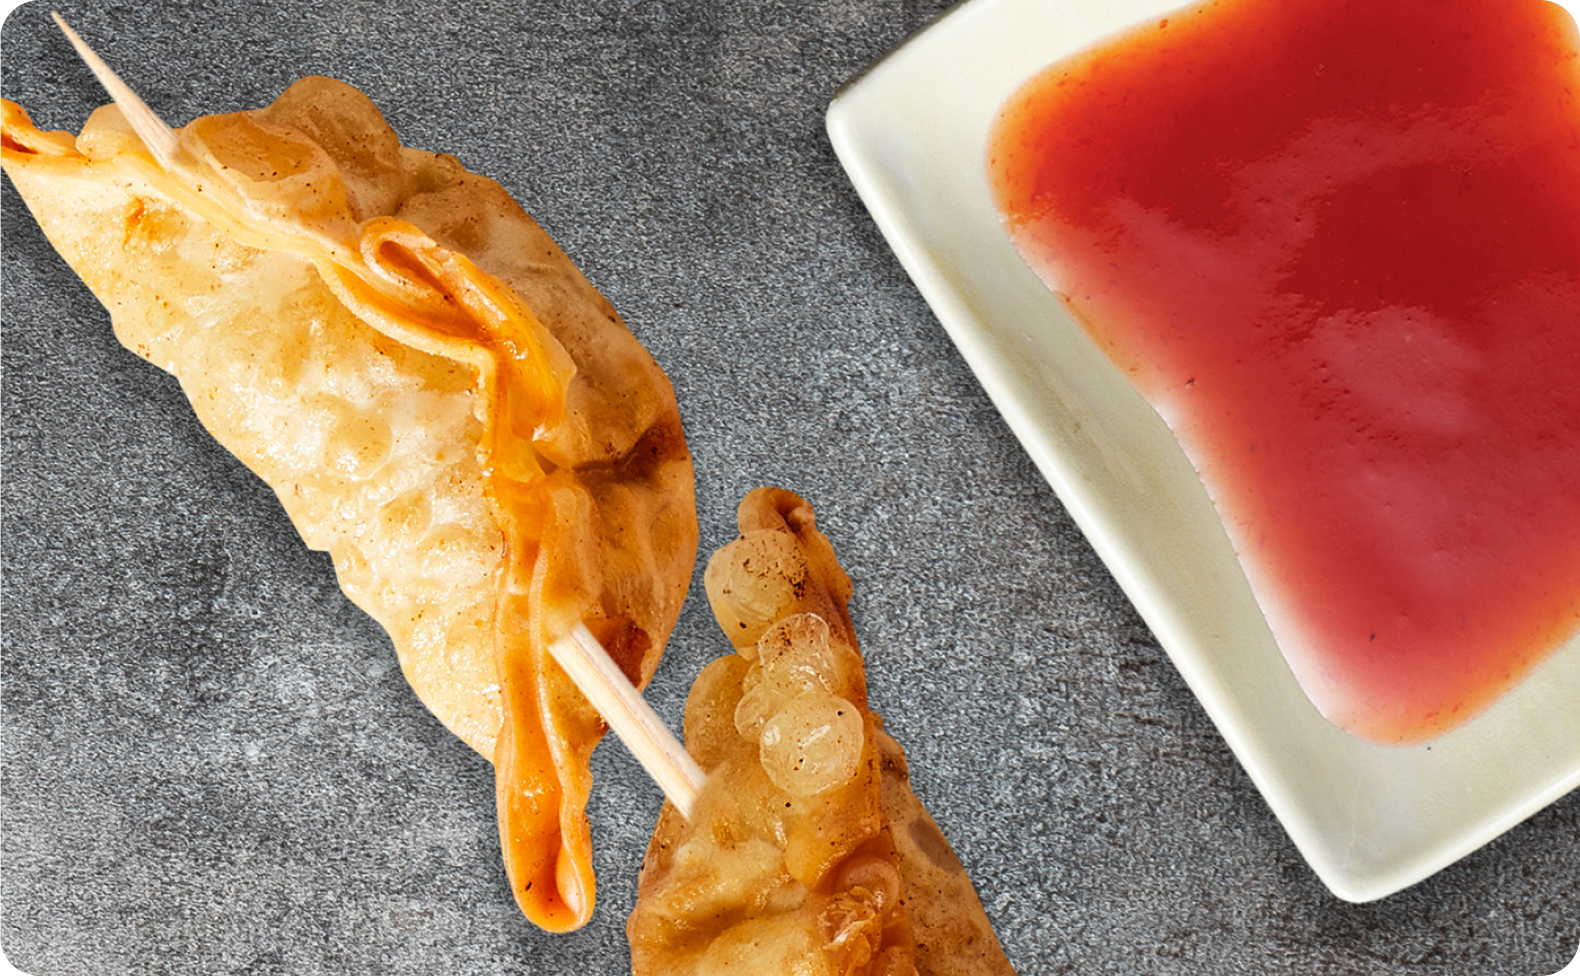 Fried dumplings on a skewer accompanied with dipping sauce.